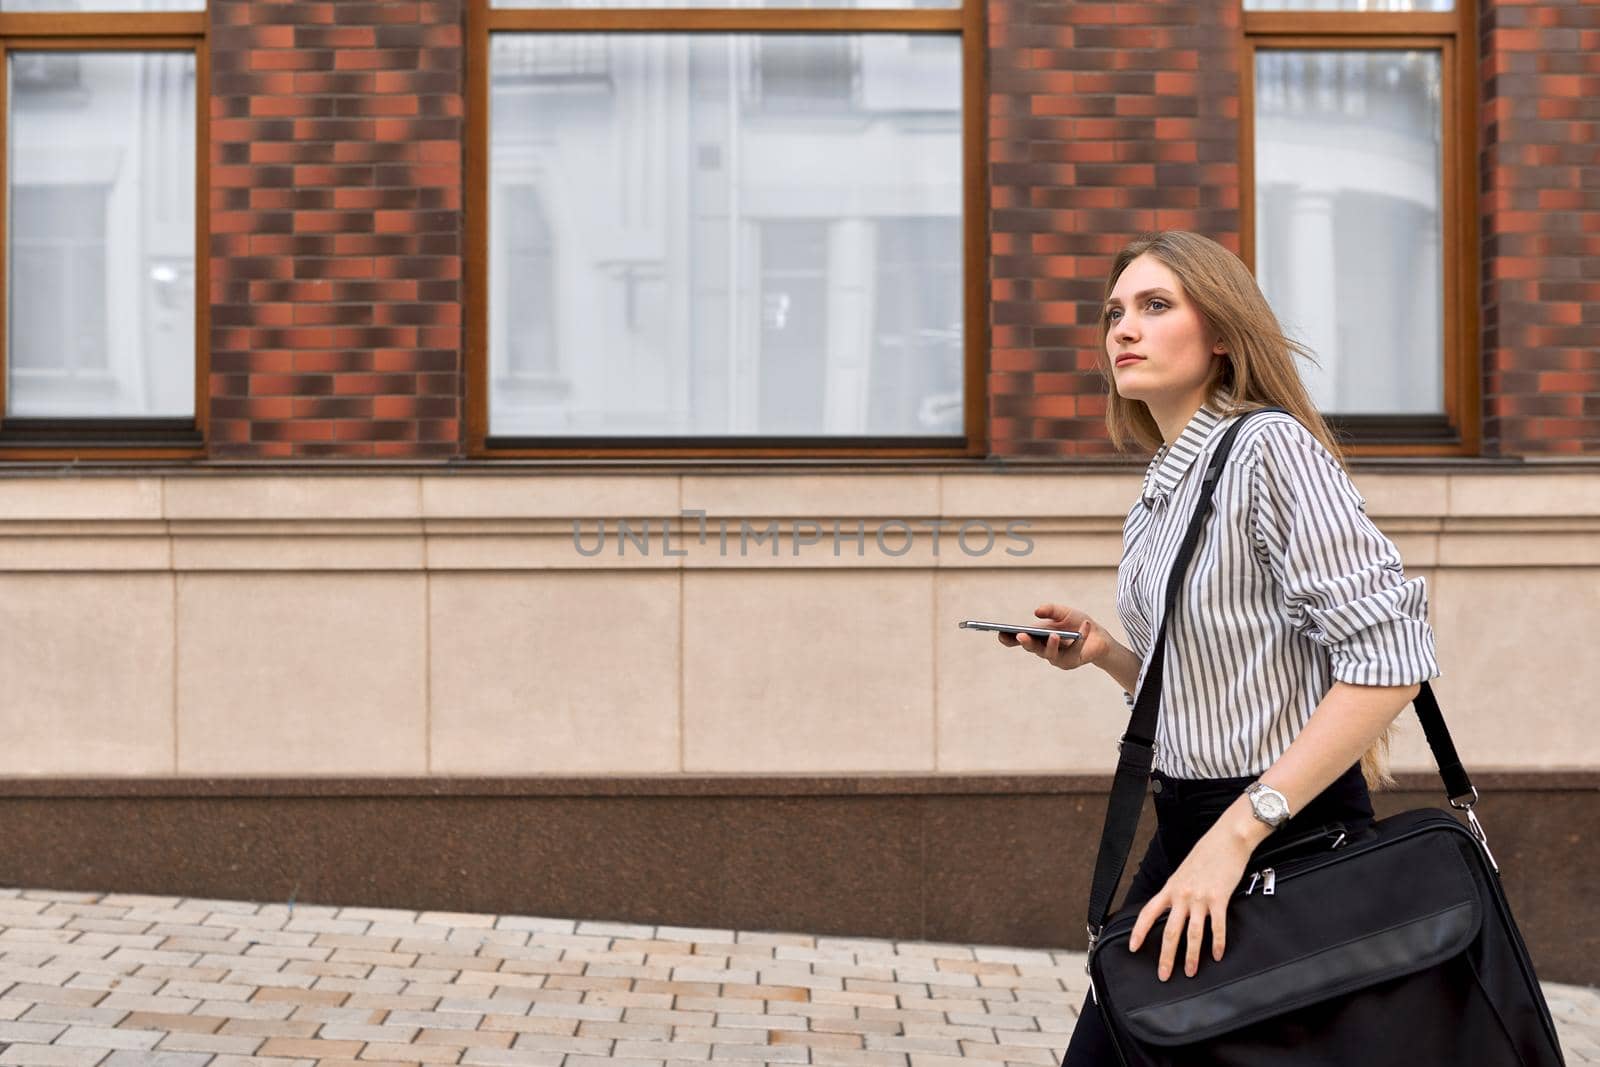 Young businesswoman walking talking on smartphone outdoor, street office building background, female professional walking forward profile view, copy space